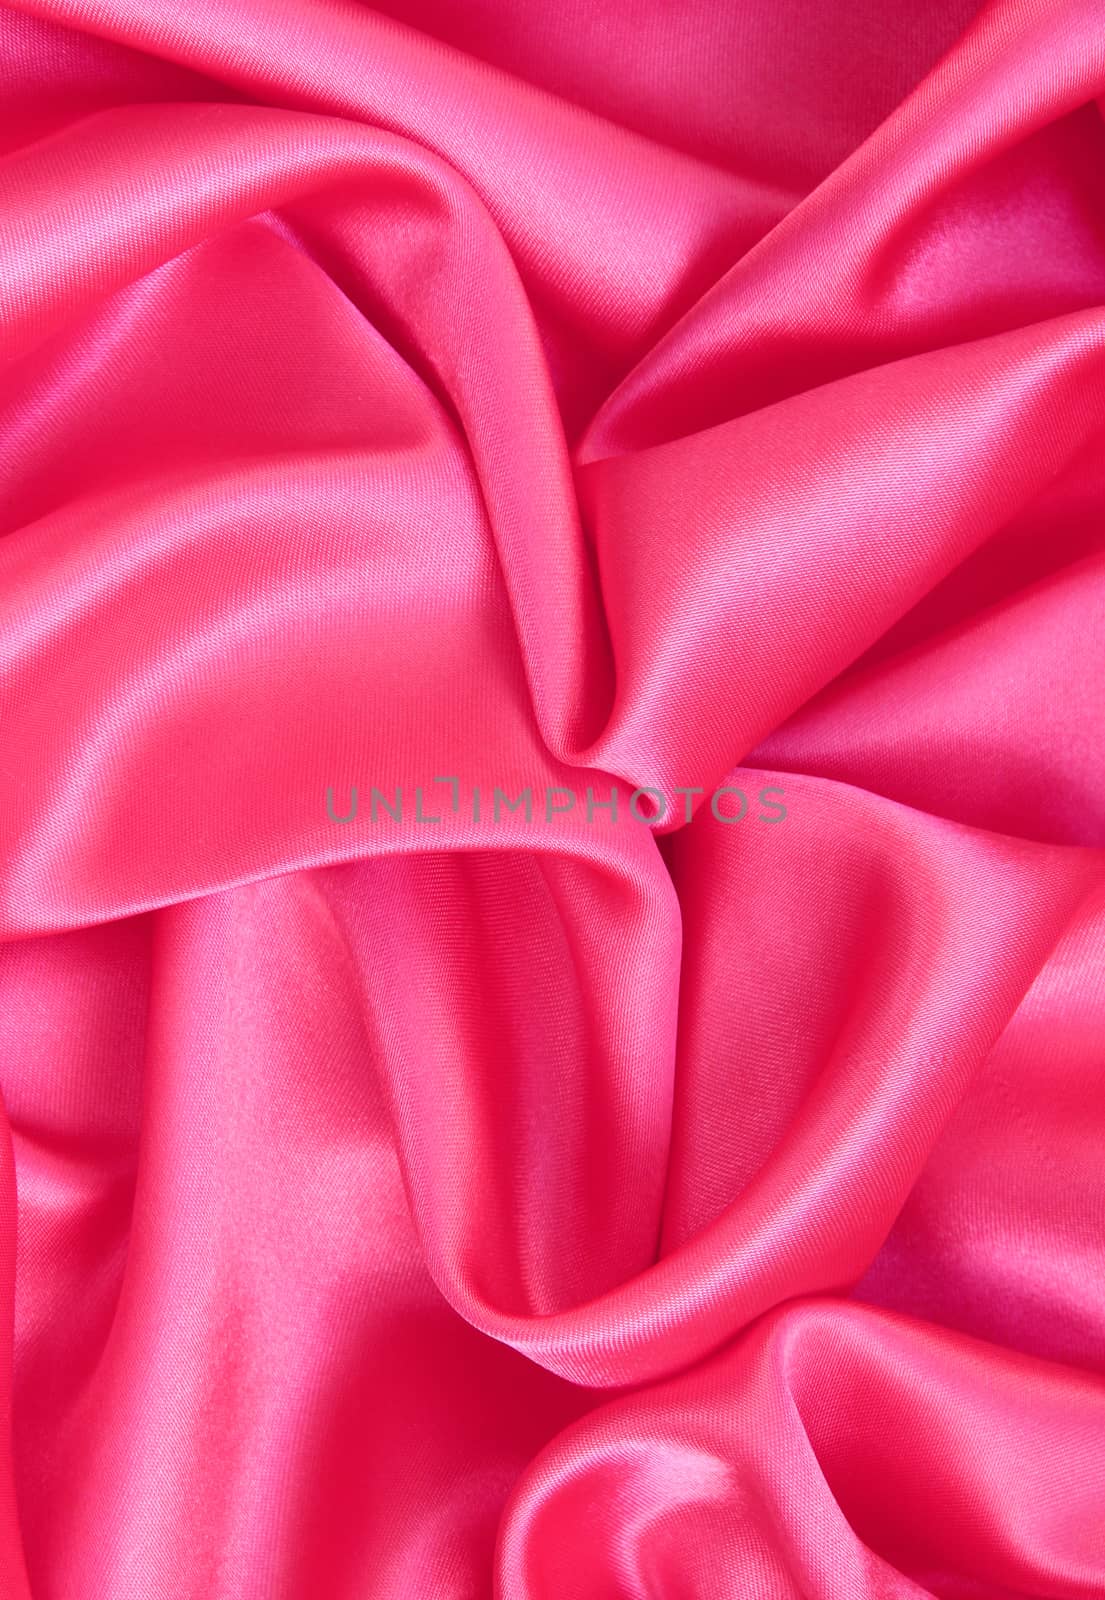 Smooth elegant pink silk or satin as background  by oxanatravel